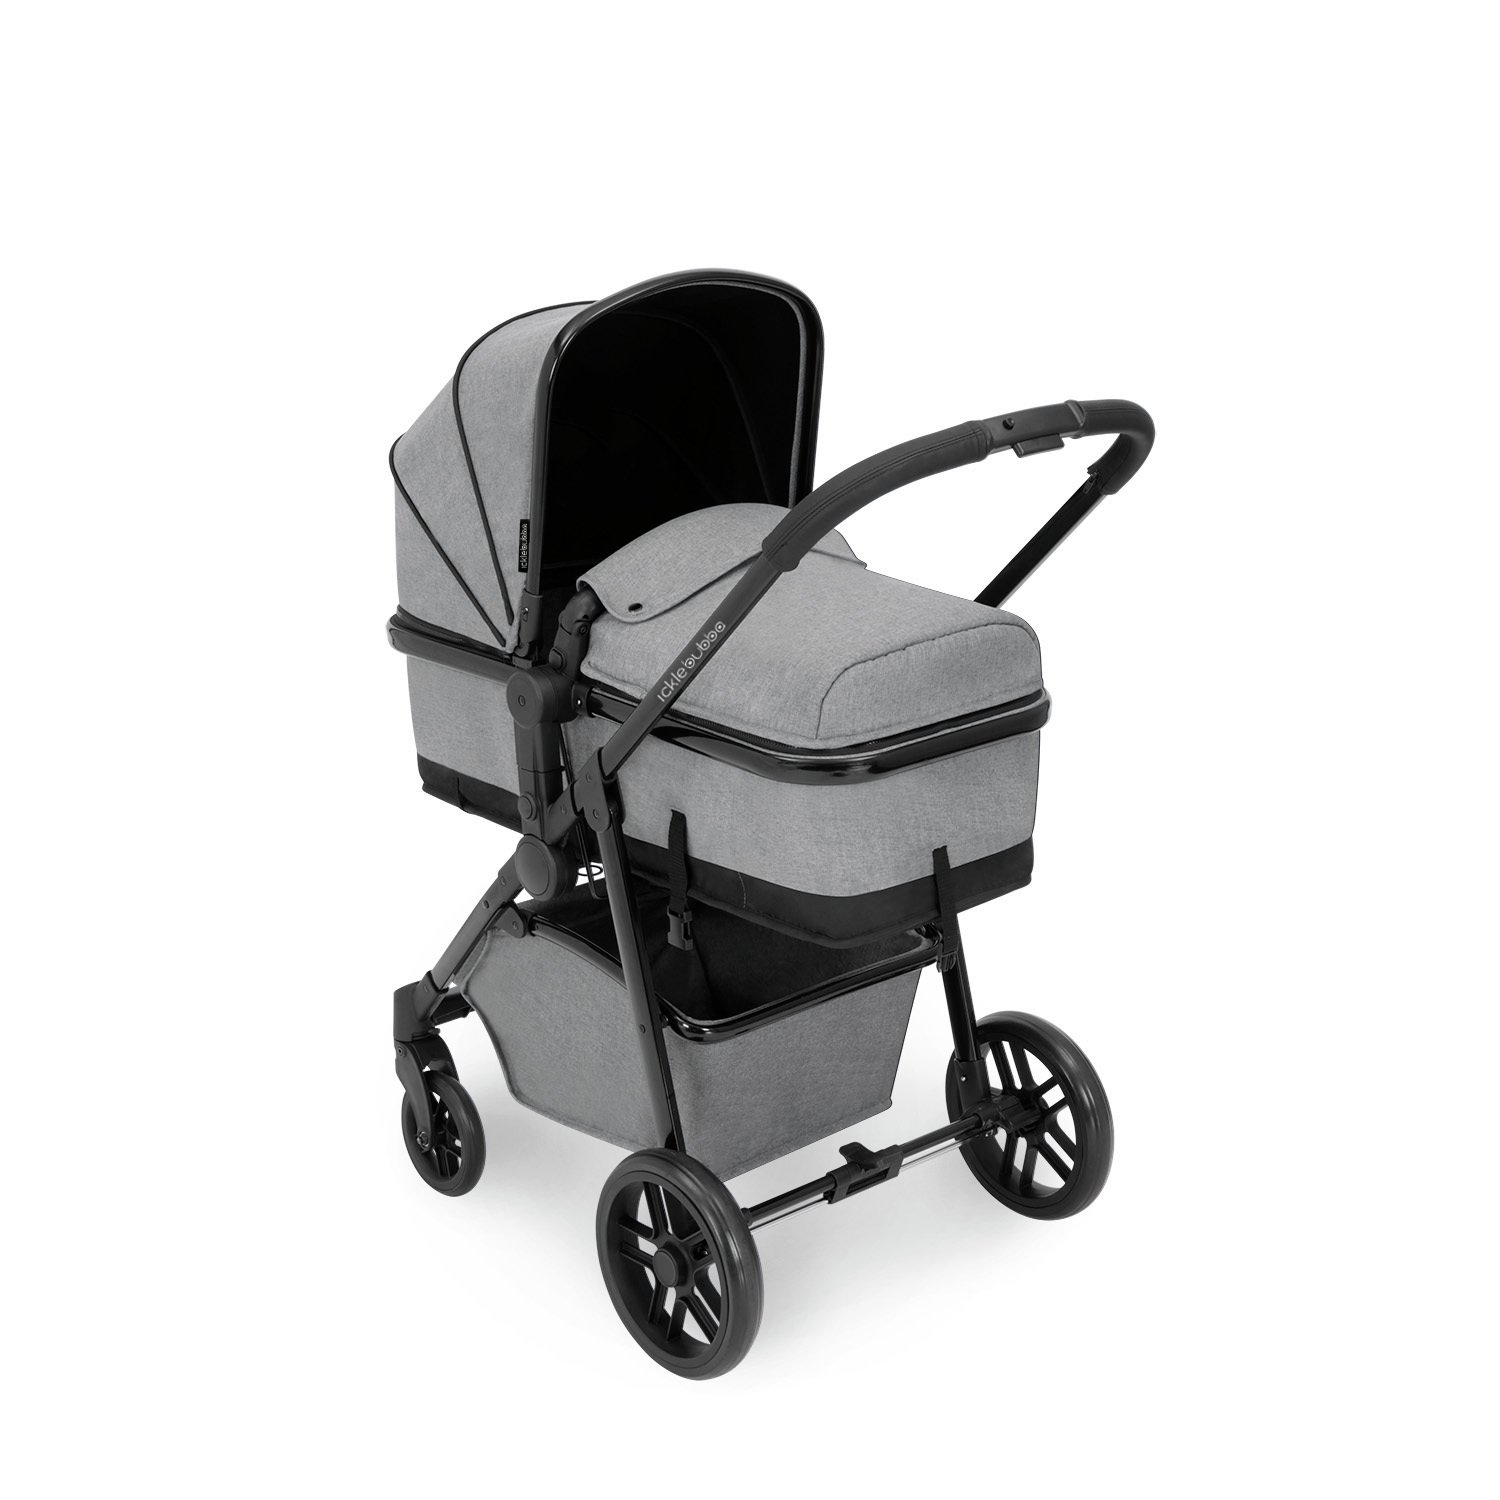 Ickle Bubba Moon 3-in-1 Travel System Review